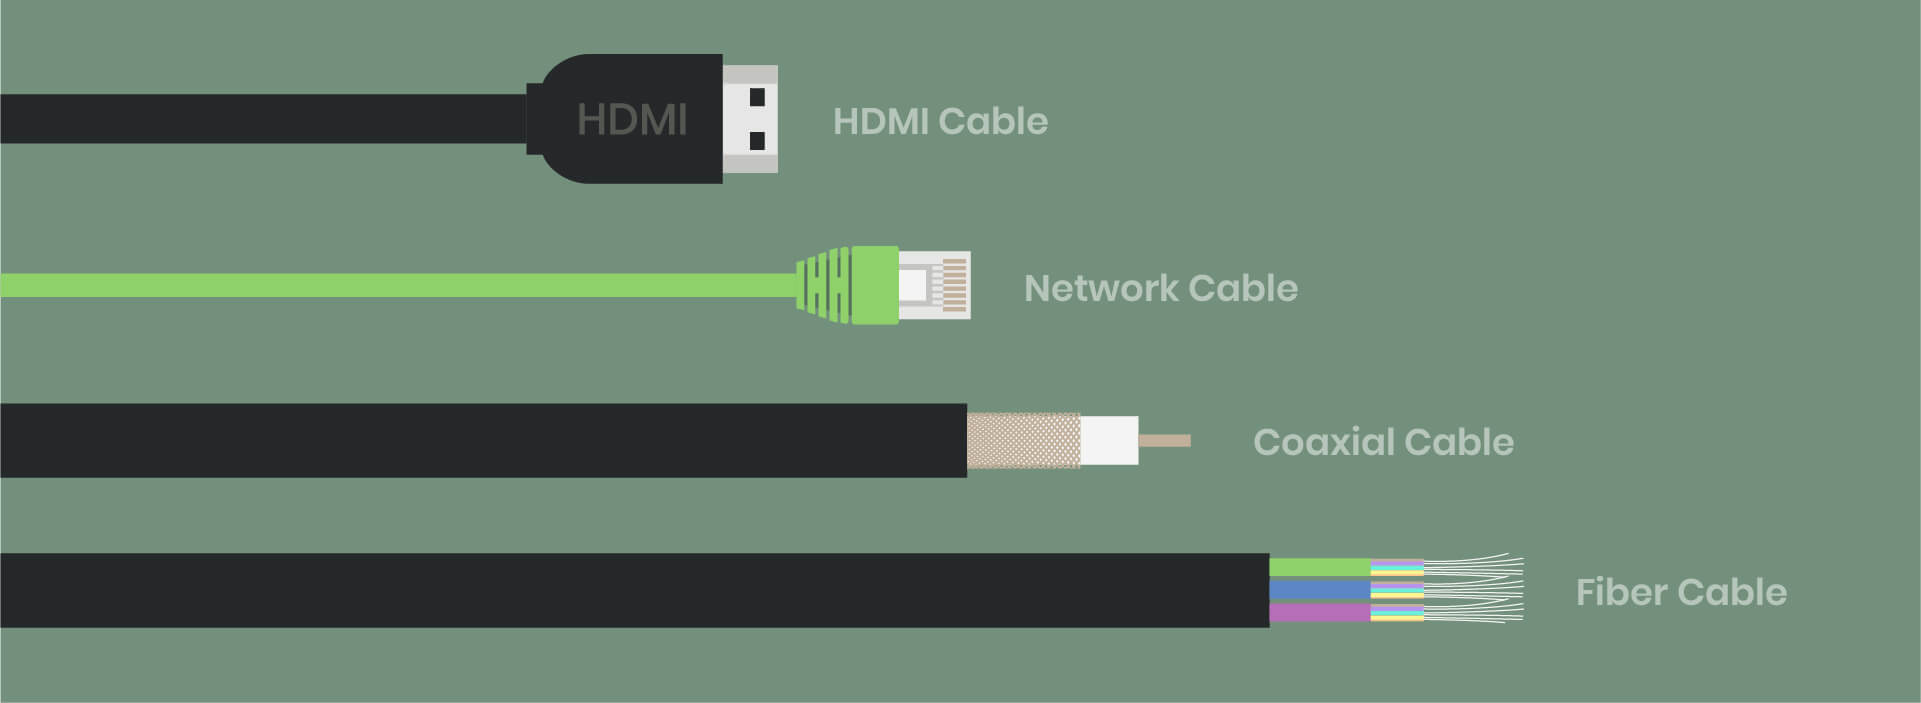 sct-HDMI-Ethernet-6-cables